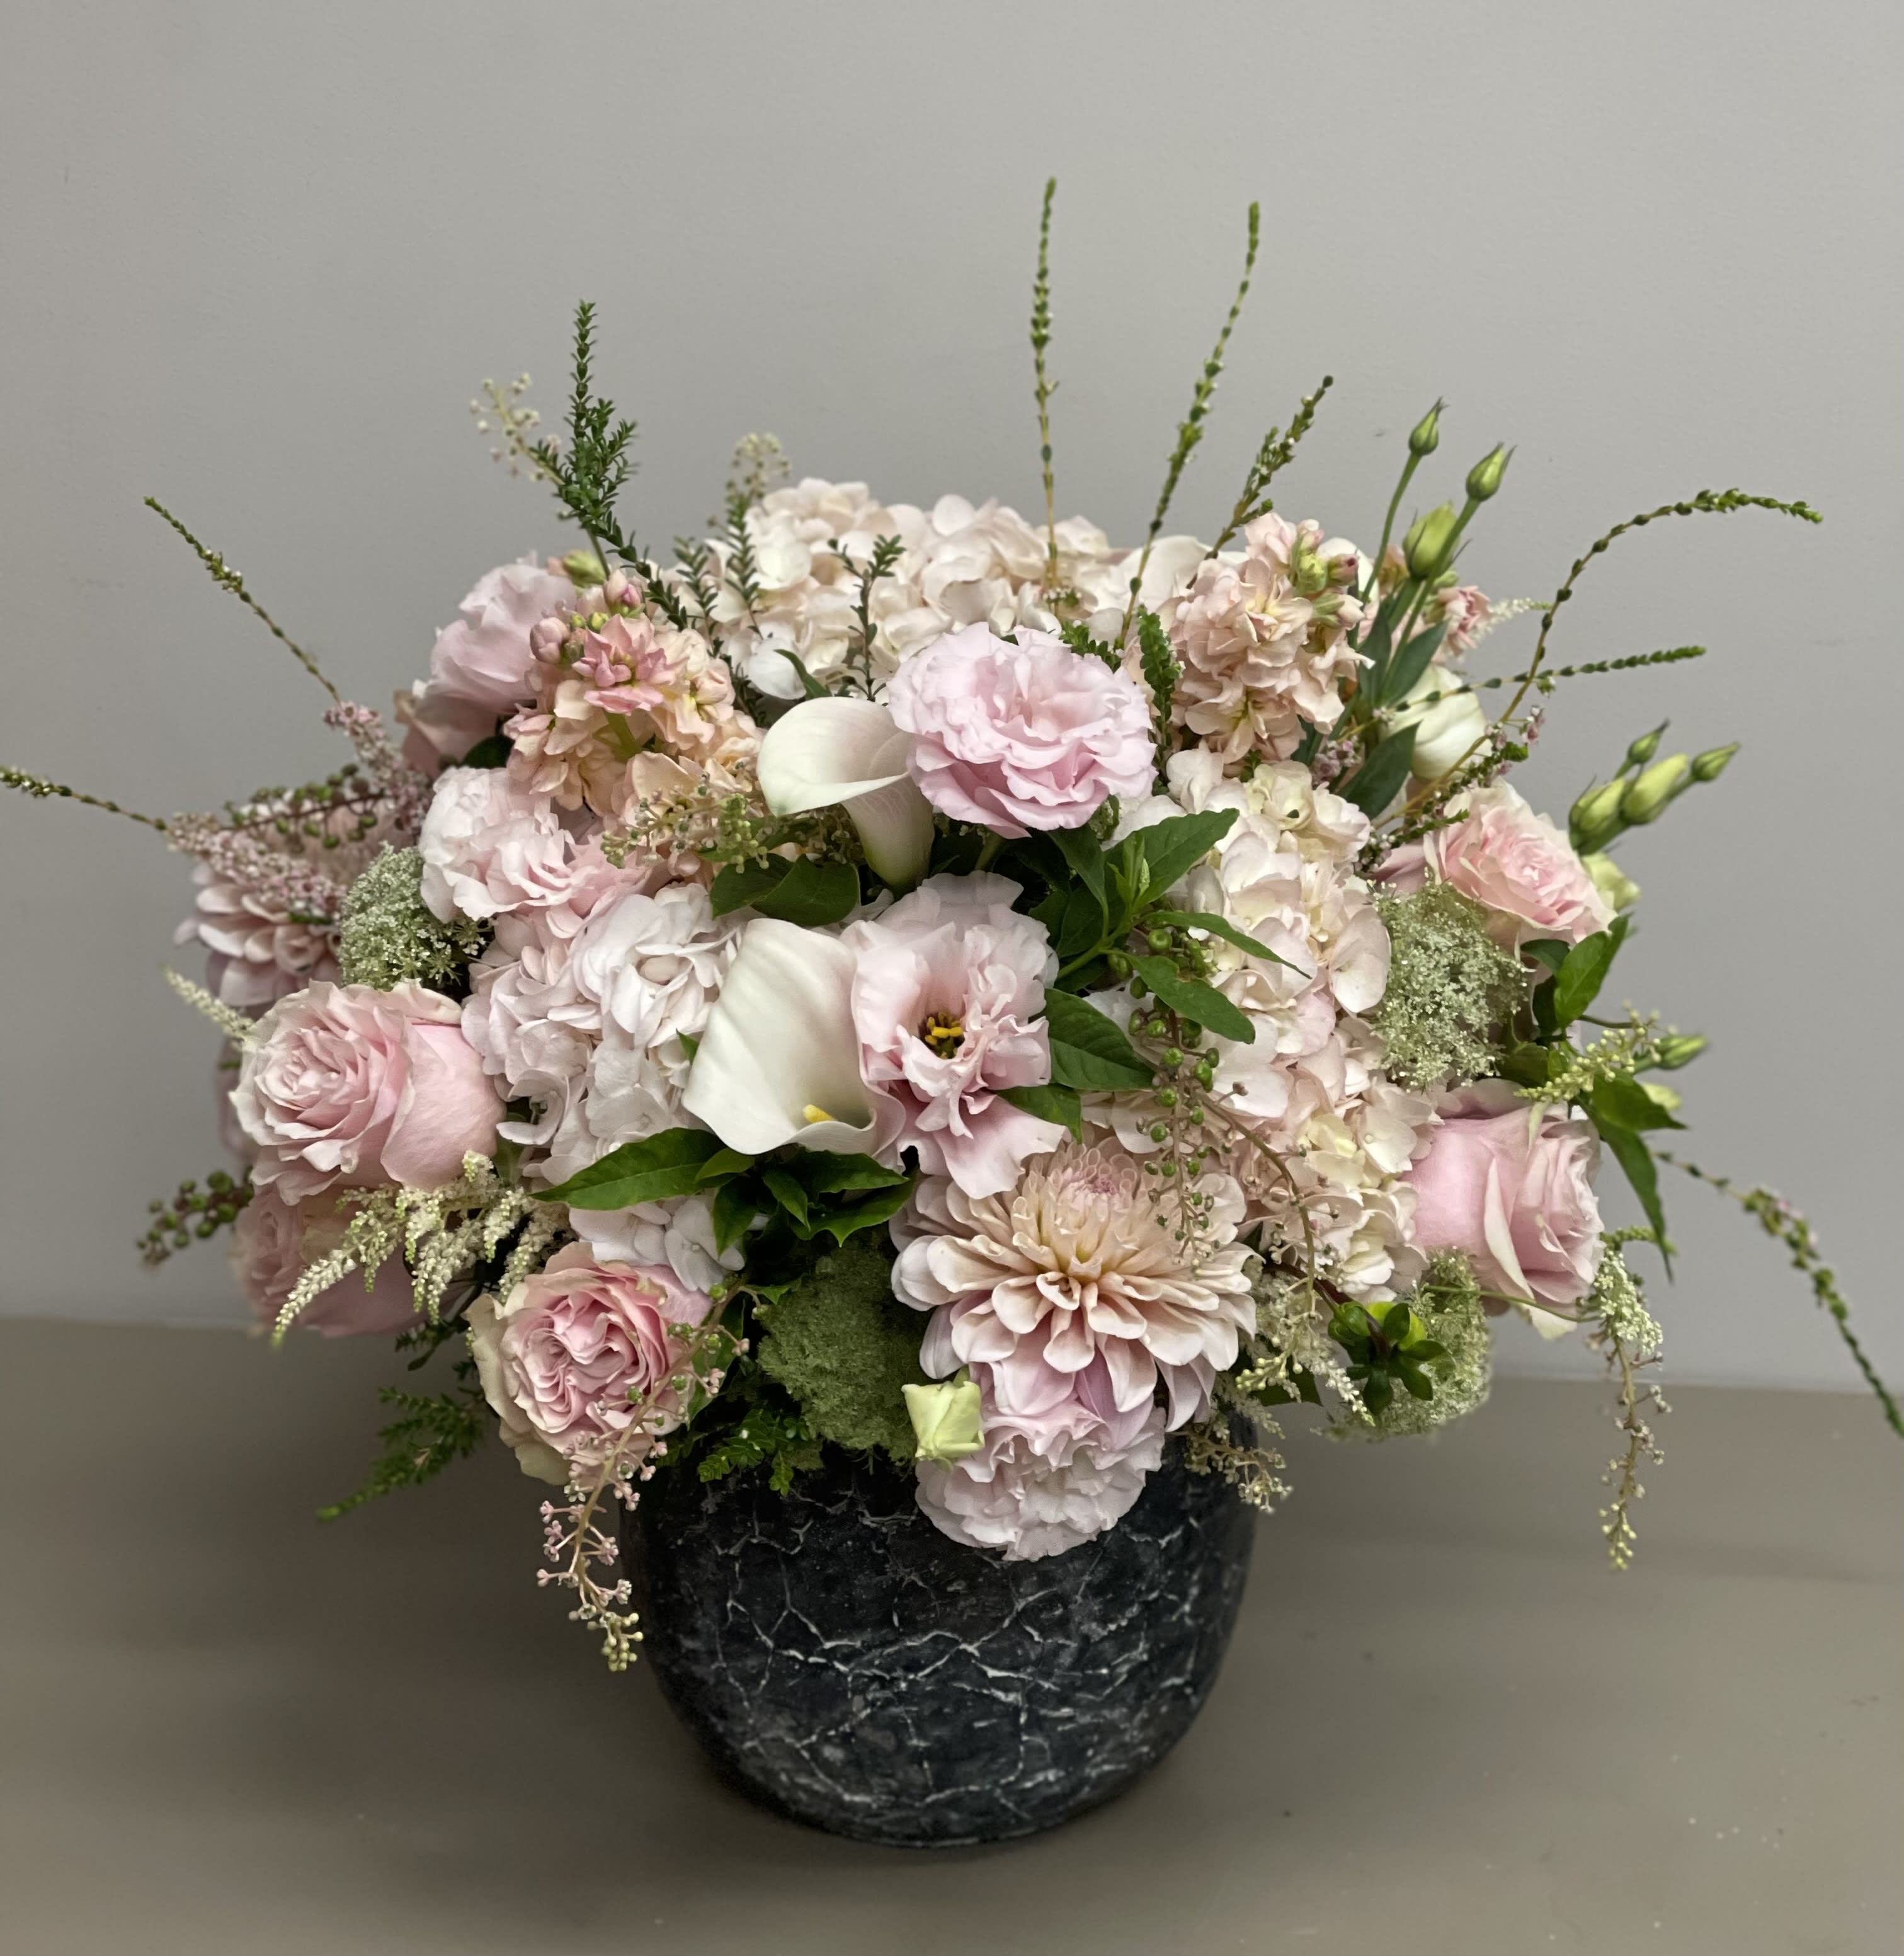 European Garden - Beautiful combination of light pink Hydrangeas, Res, Lisianthus, Dahlia and other seasonal flowers and greens in a ceramic container.  **container might vary due to availability**